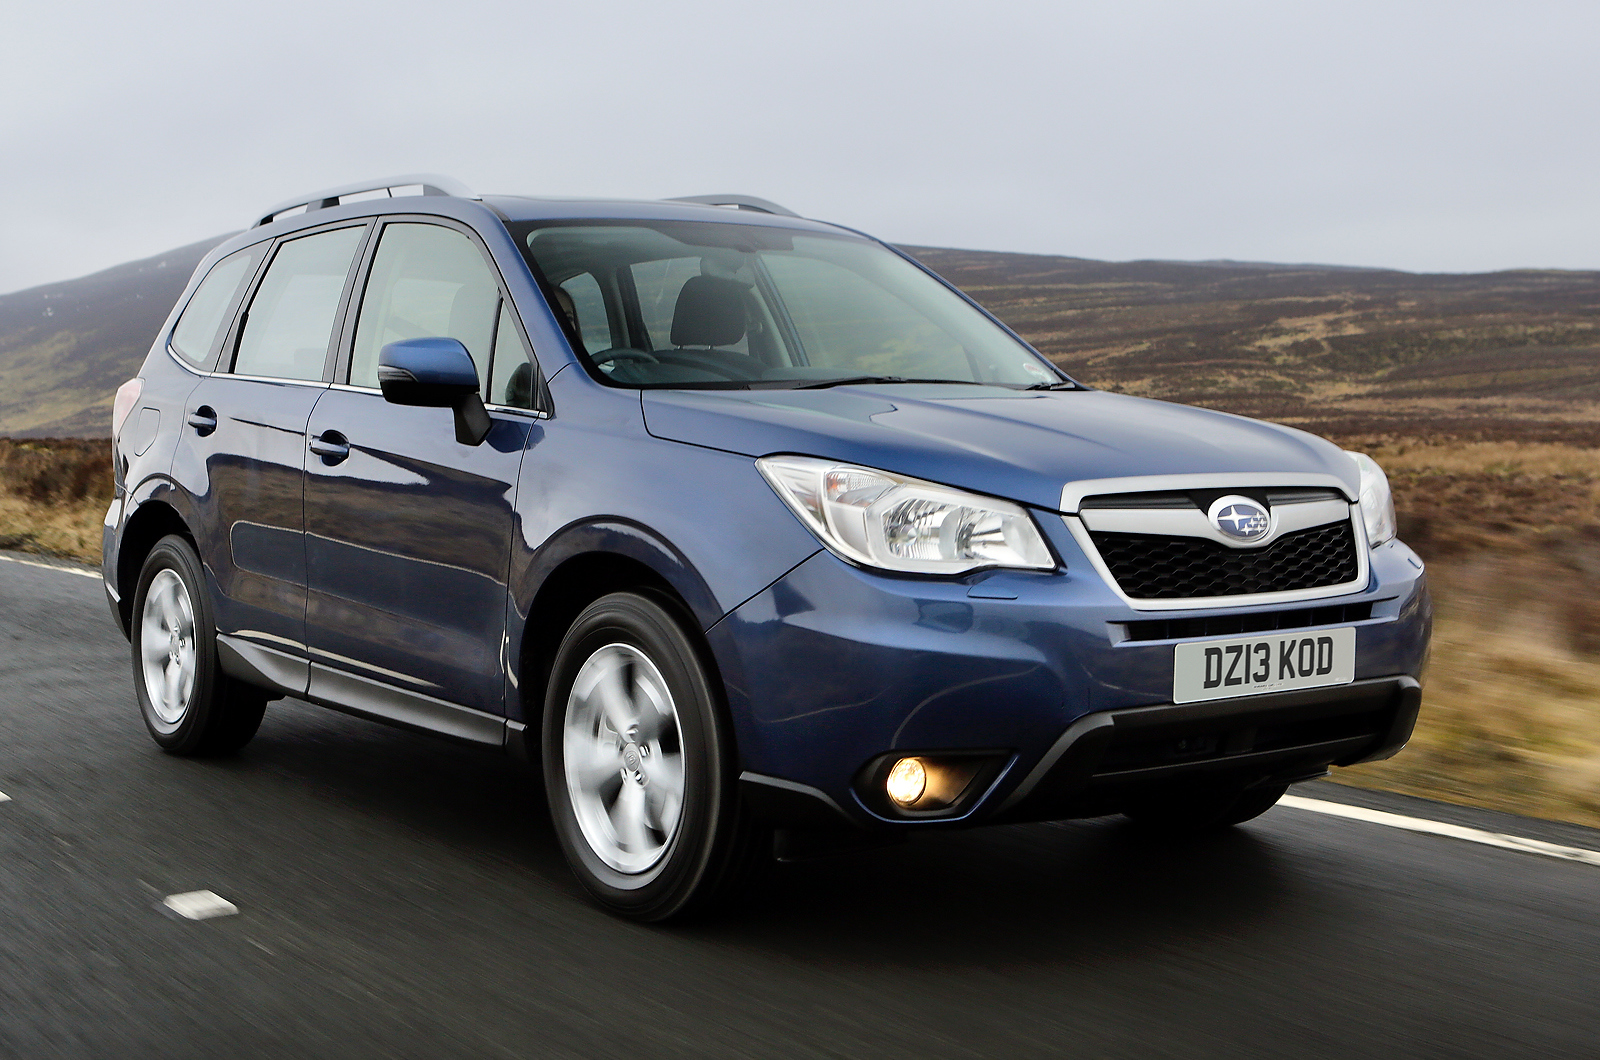 2013 Subaru Forester 2.0D XC first drive review Review